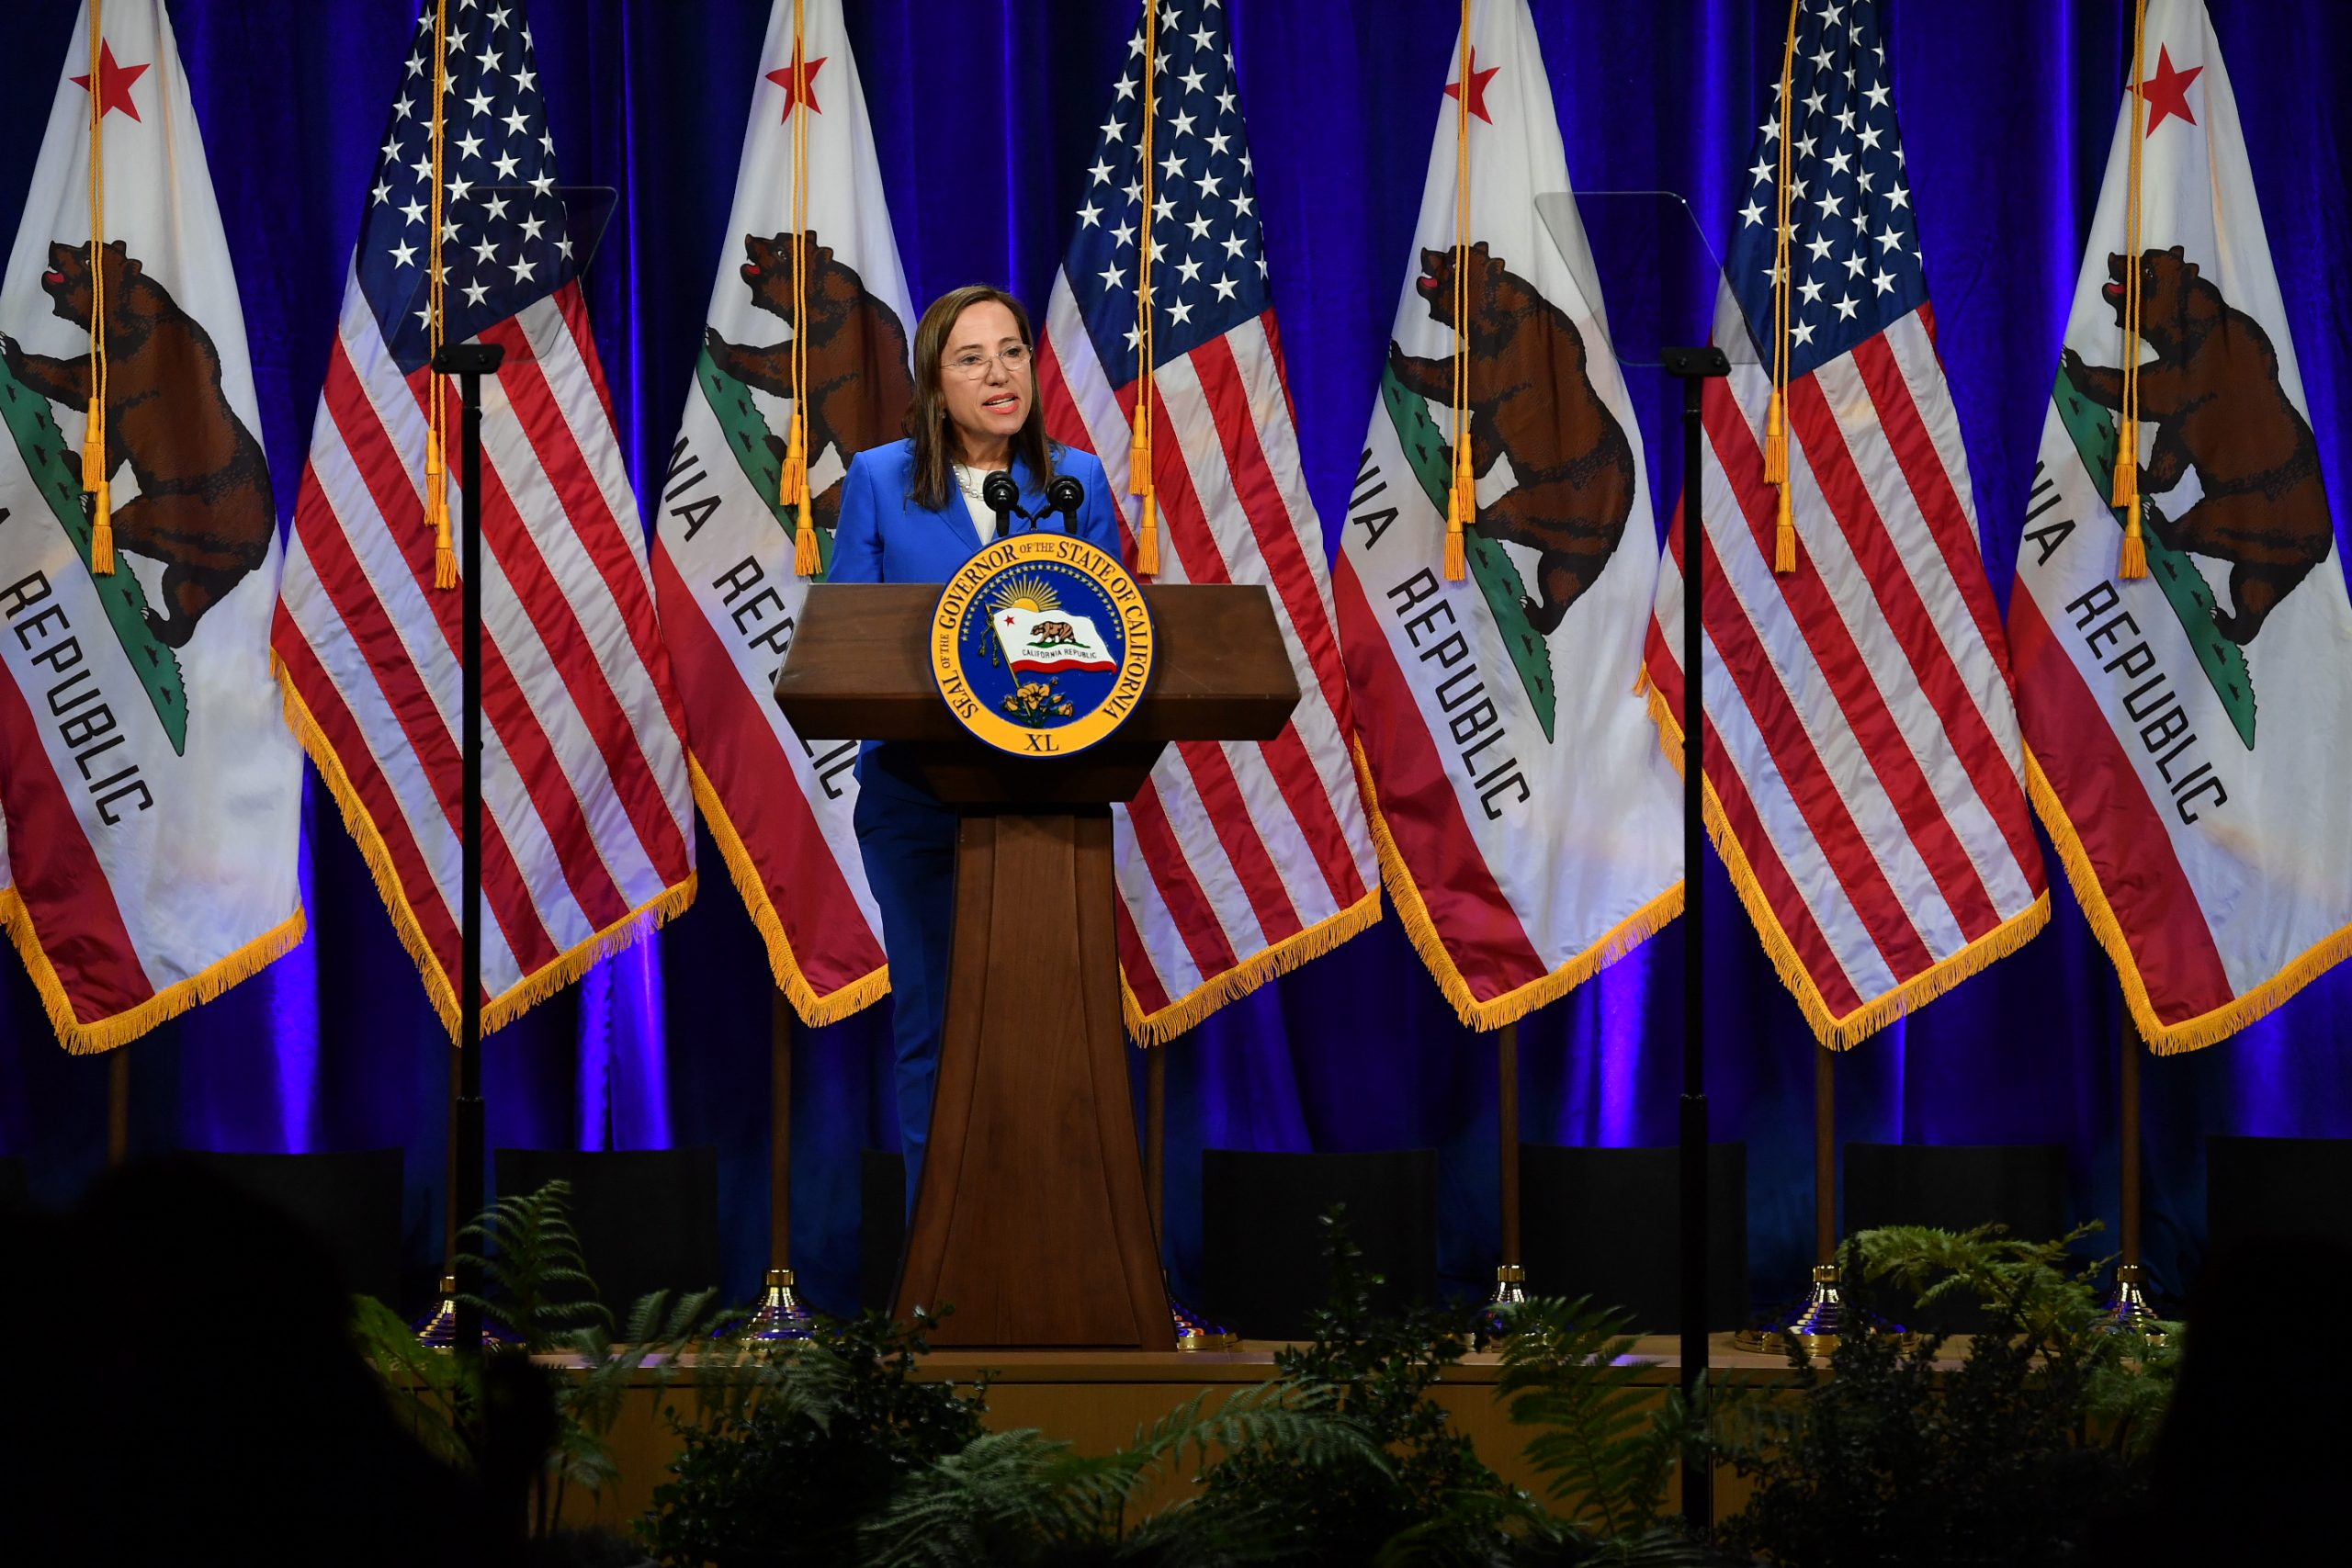 Lieutenant Governor Kounalakis Delivers Introductory Remarks at 2022 State of the State Address